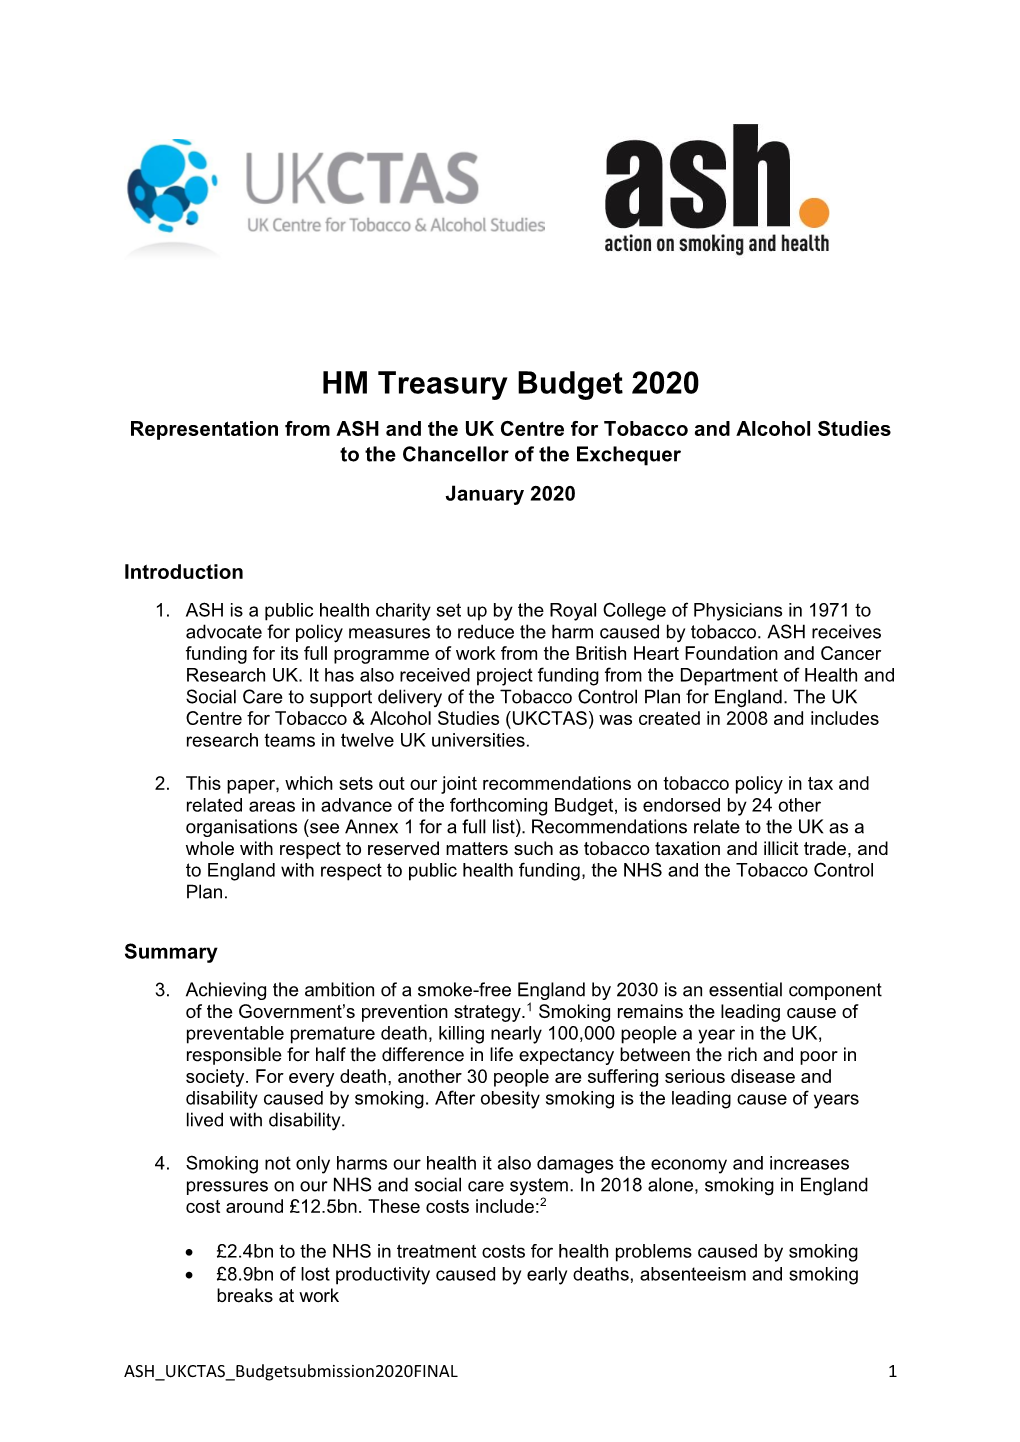 HM Treasury Budget 2020 Representation from ASH and the UK Centre for Tobacco and Alcohol Studies to the Chancellor of the Exchequer January 2020